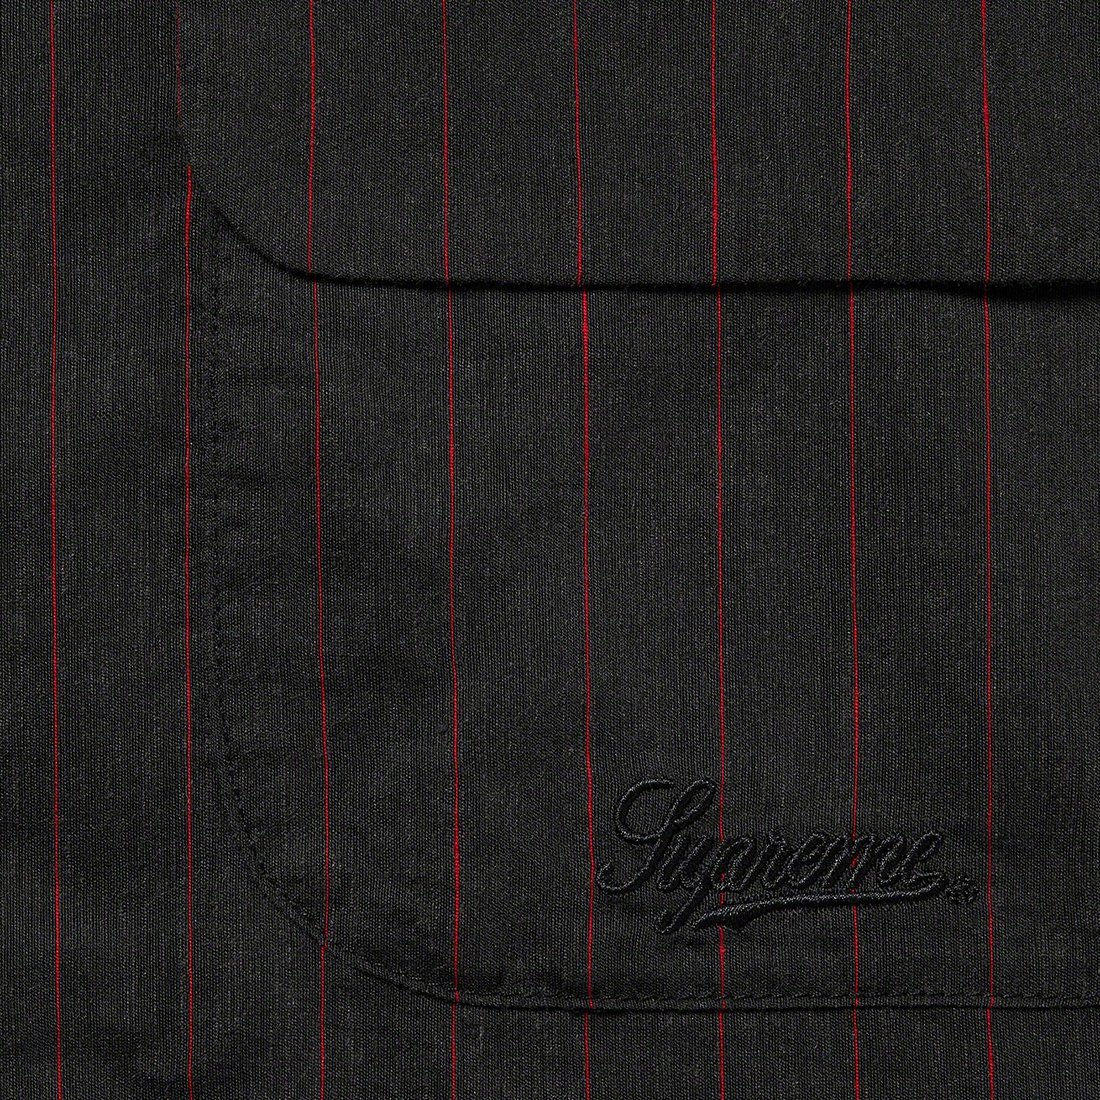 Details on Pinstripe Linen Shirt Black from spring summer 2023 (Price is $138)